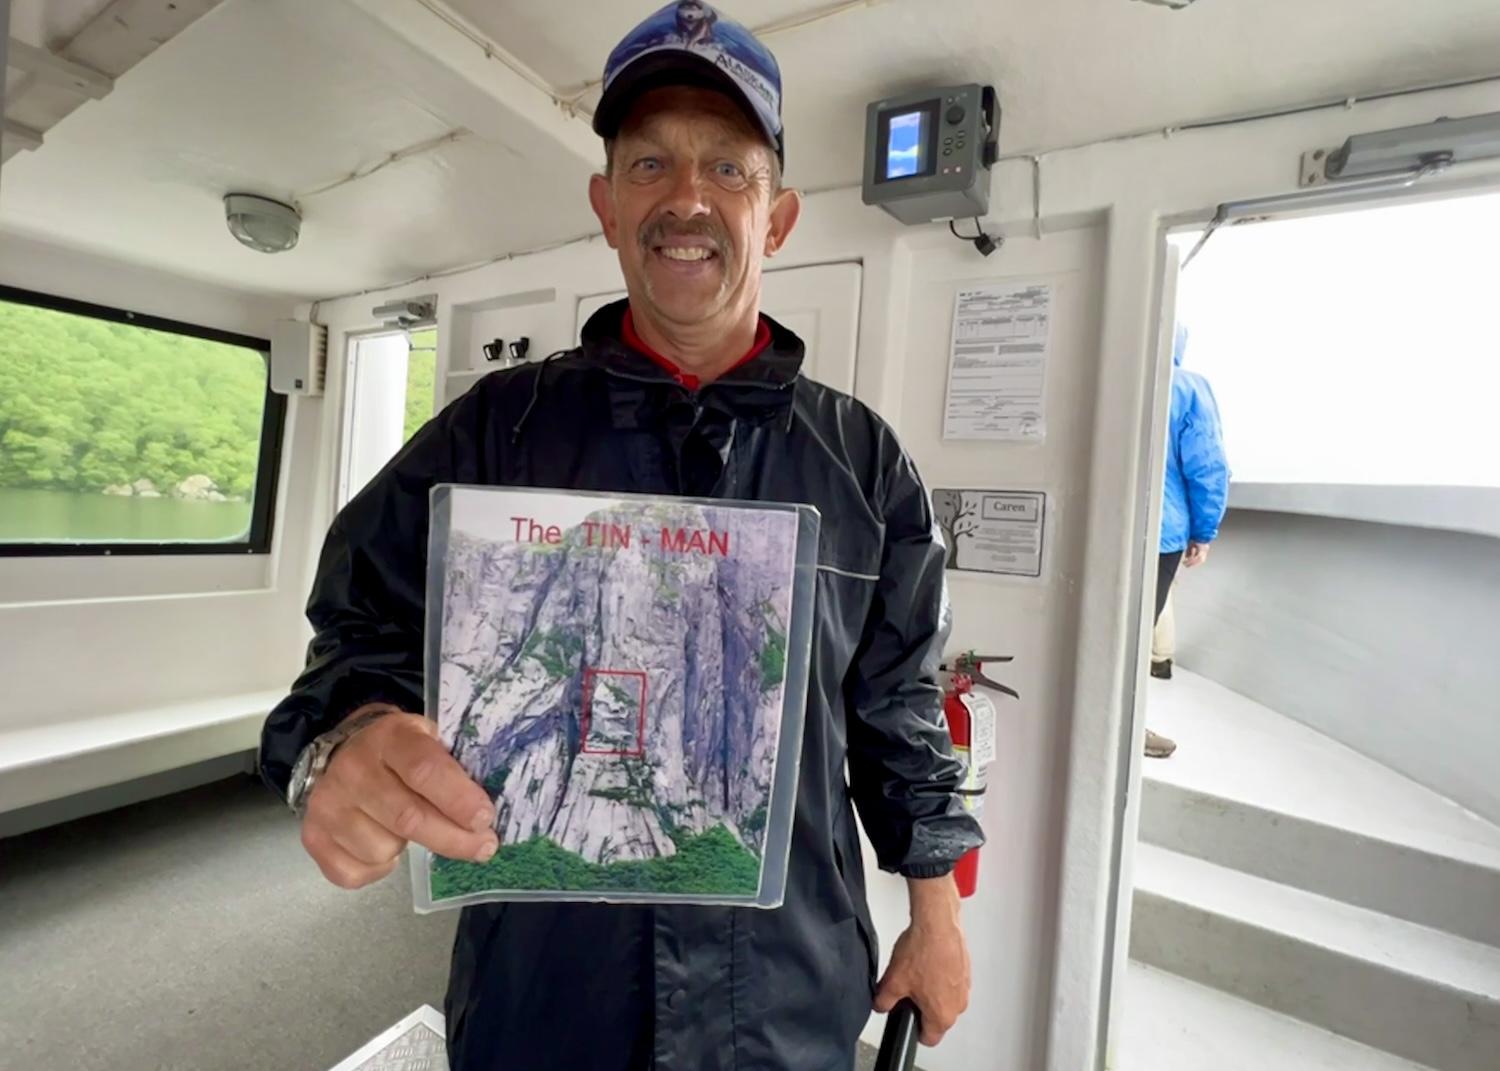 BonTours guide Glen Laing shows a laminated photo while explaining how to spot the Tin Man in the rock cliffs along Western Brook Pond.